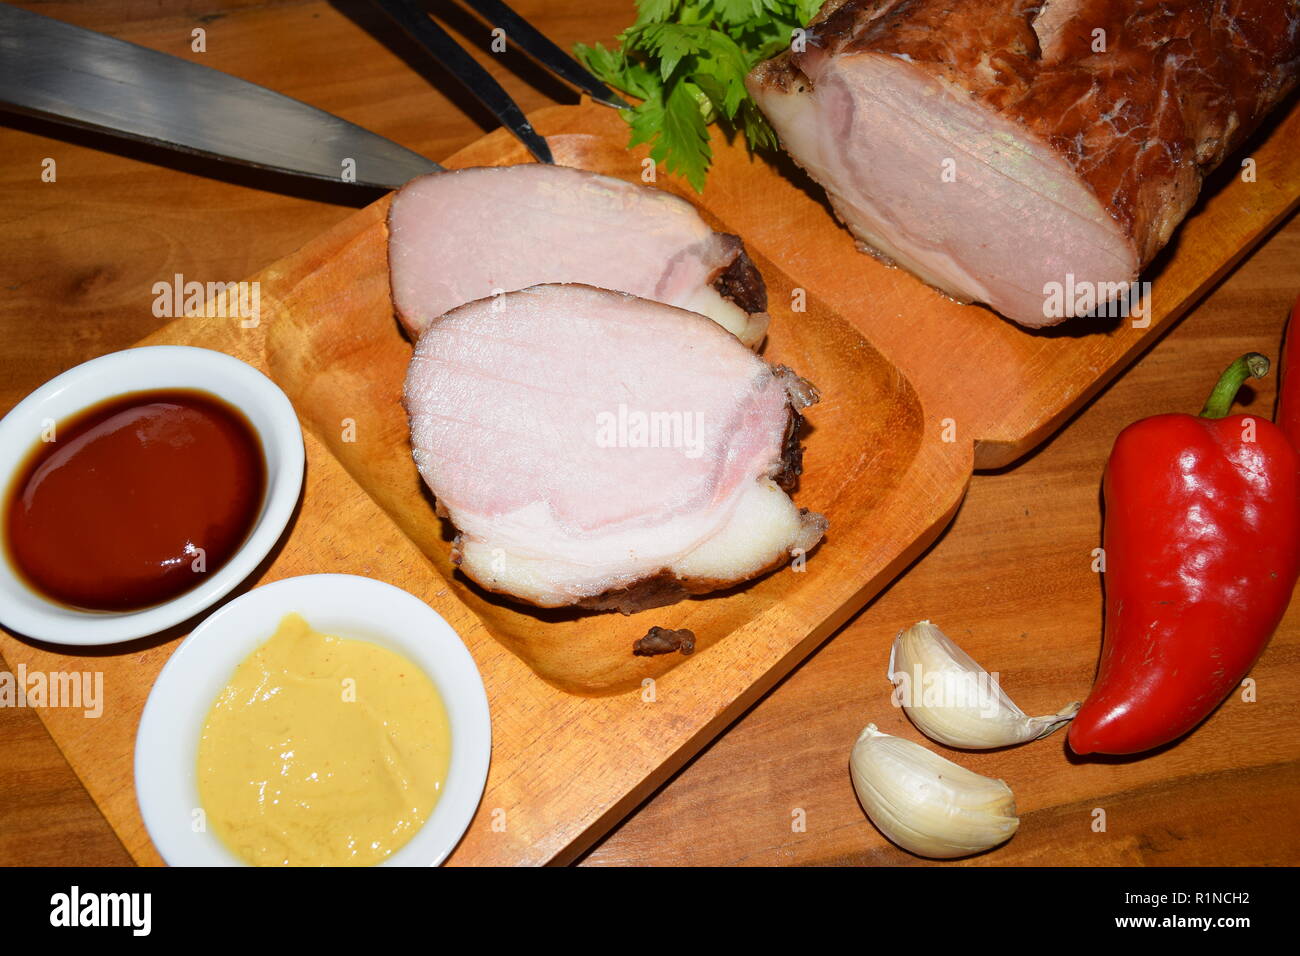 Kassler on wooden rustic plate. It is often served with sauerkraut and mashed potatoes. Fully Cooked cured and smoked pork loin chops on a wooden tray. Stock Photo